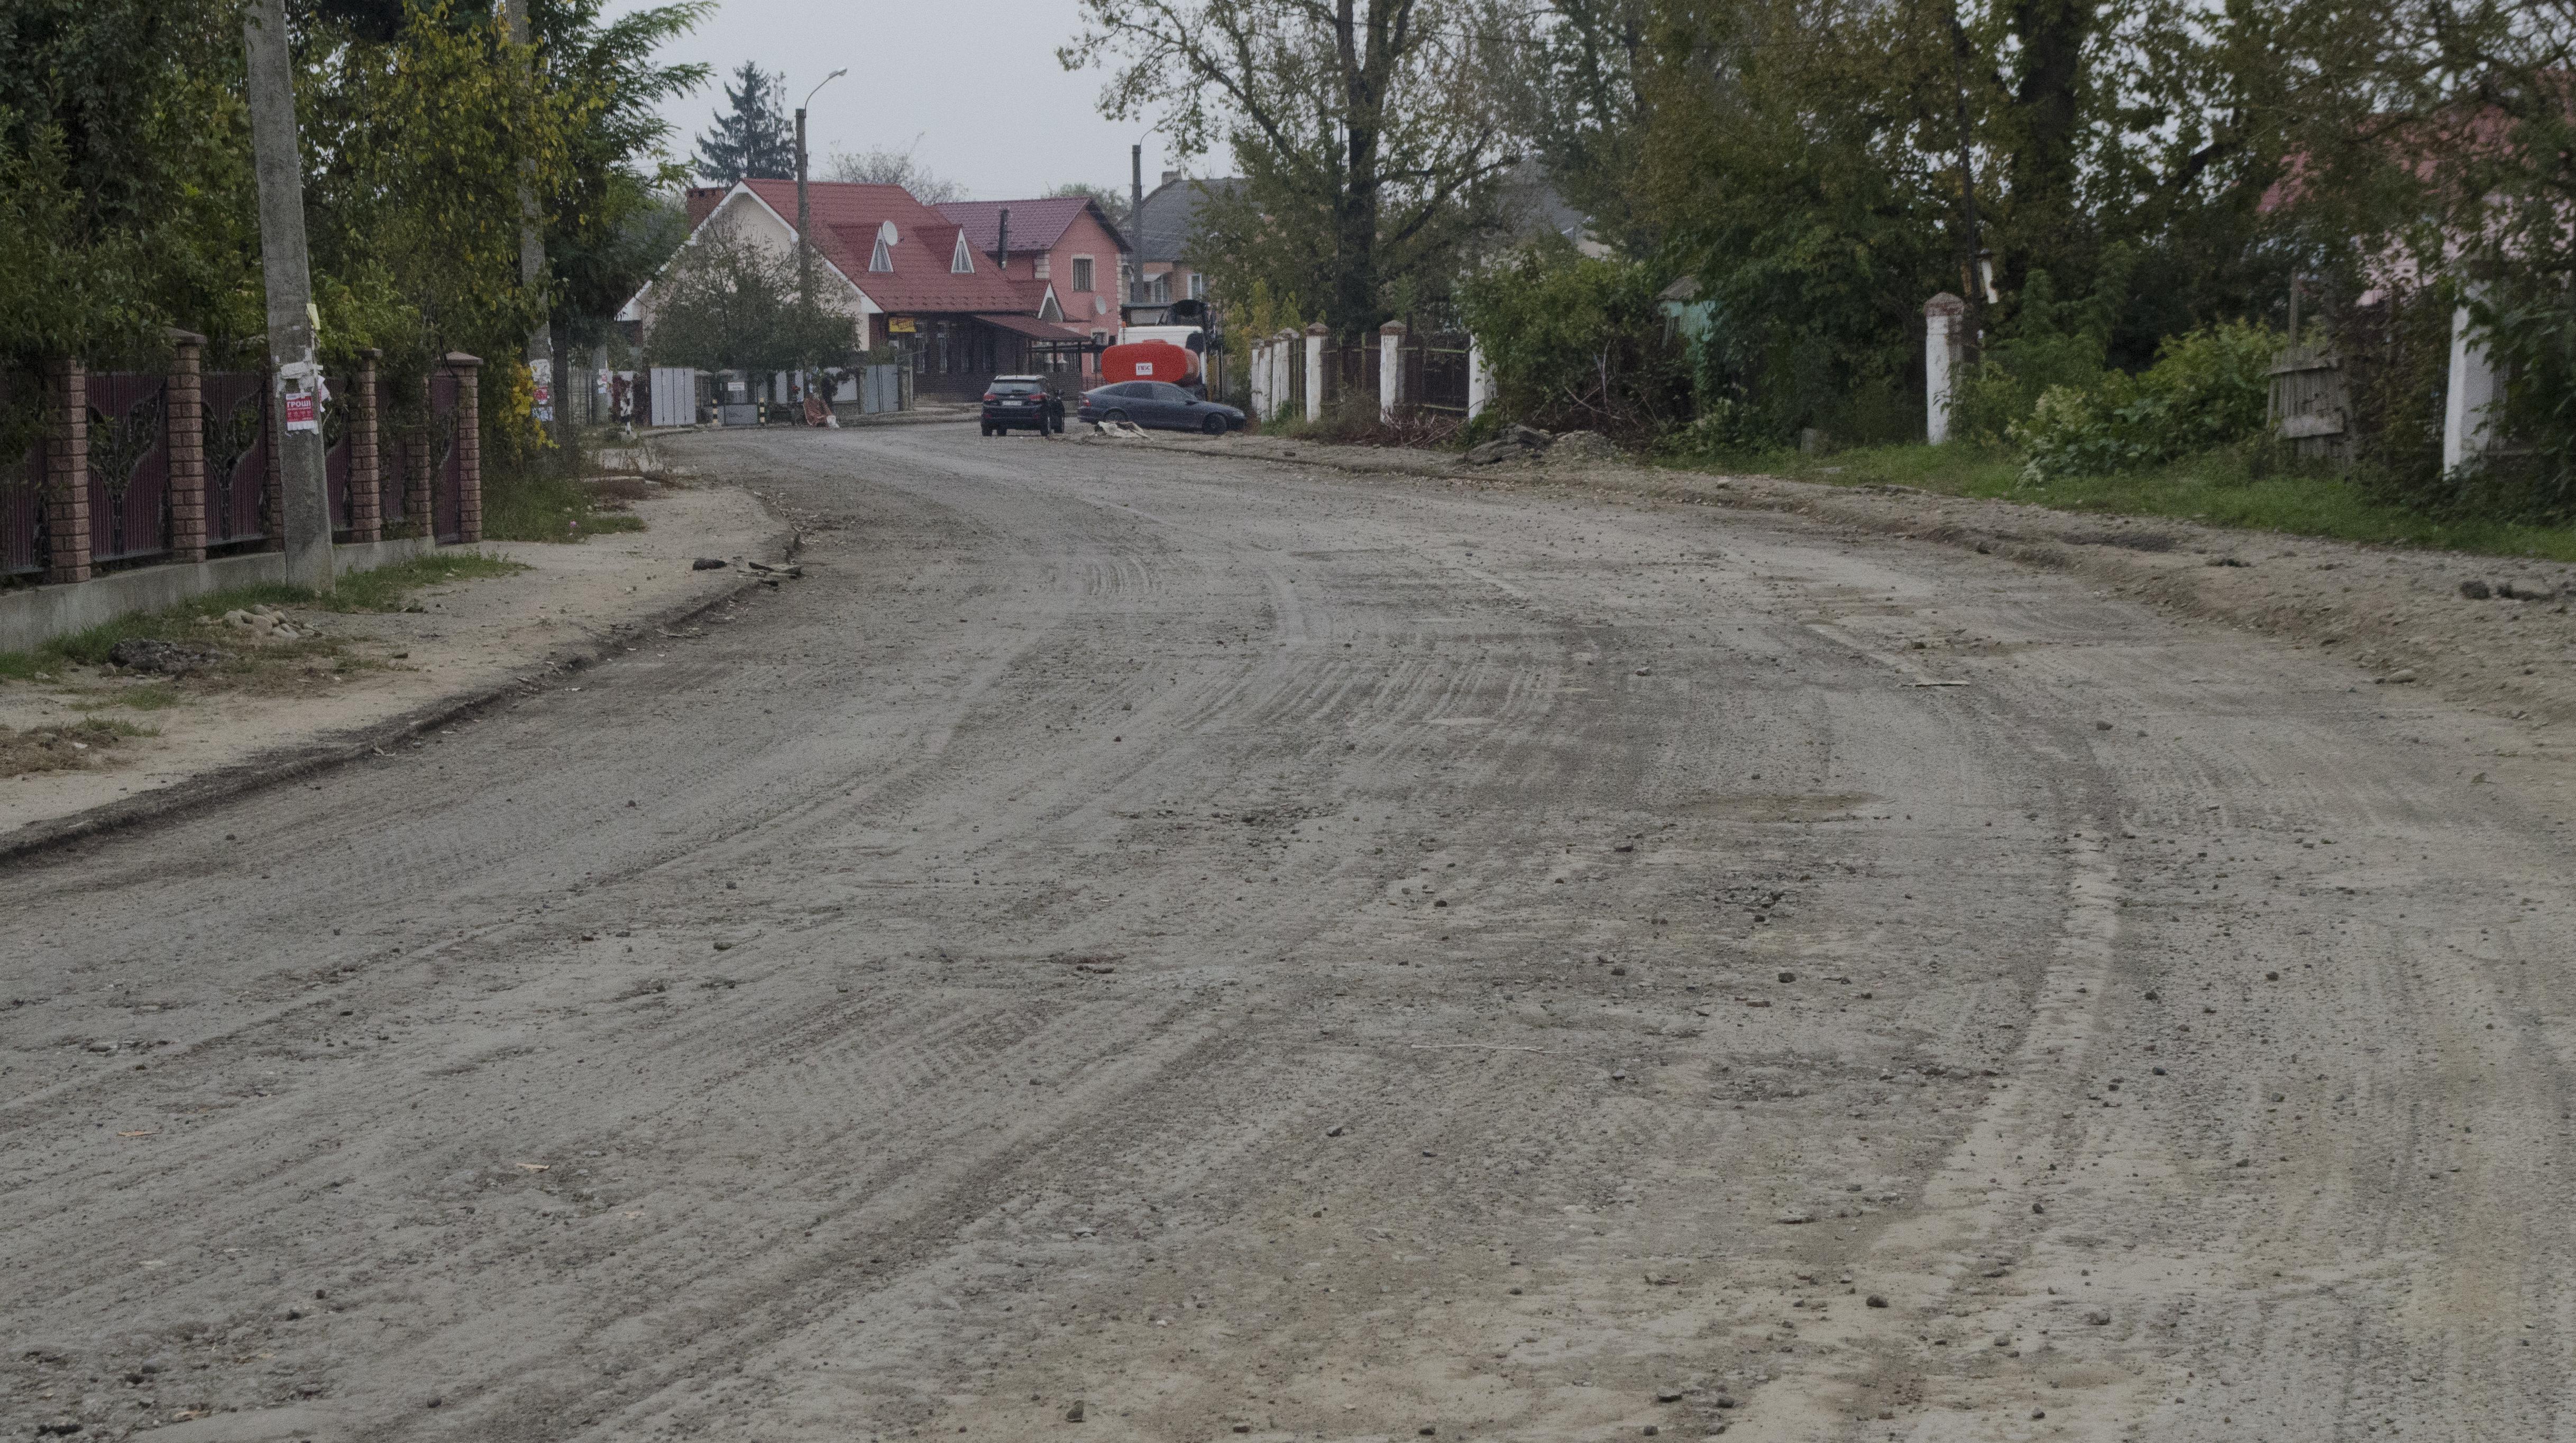 The road to the night bazaar in Kolomyia is being repaired